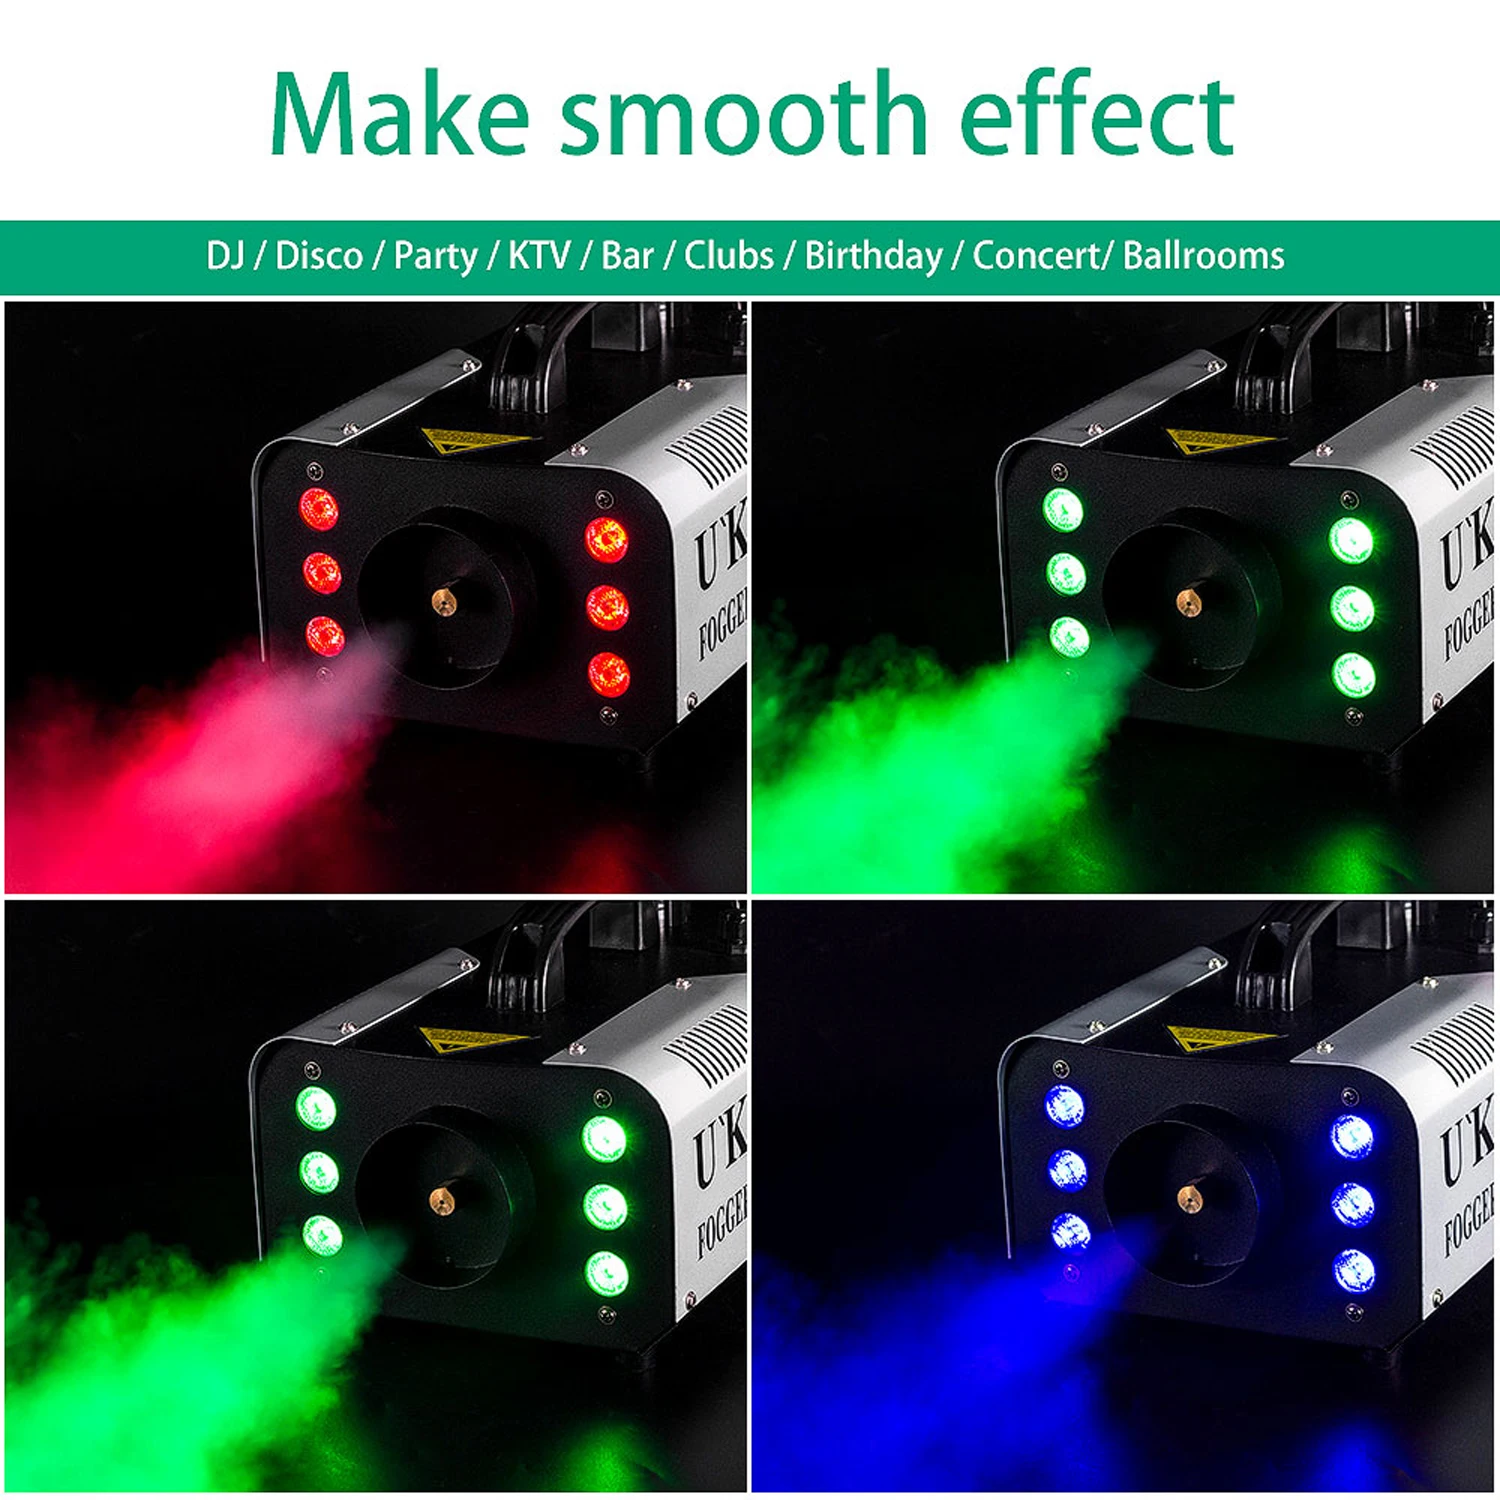 U`King 1200W Stage Light Fog Machine with RGB 6LEDs Stage Light Smoke Haze Generator Remote Controlled Stage Effect Equipment